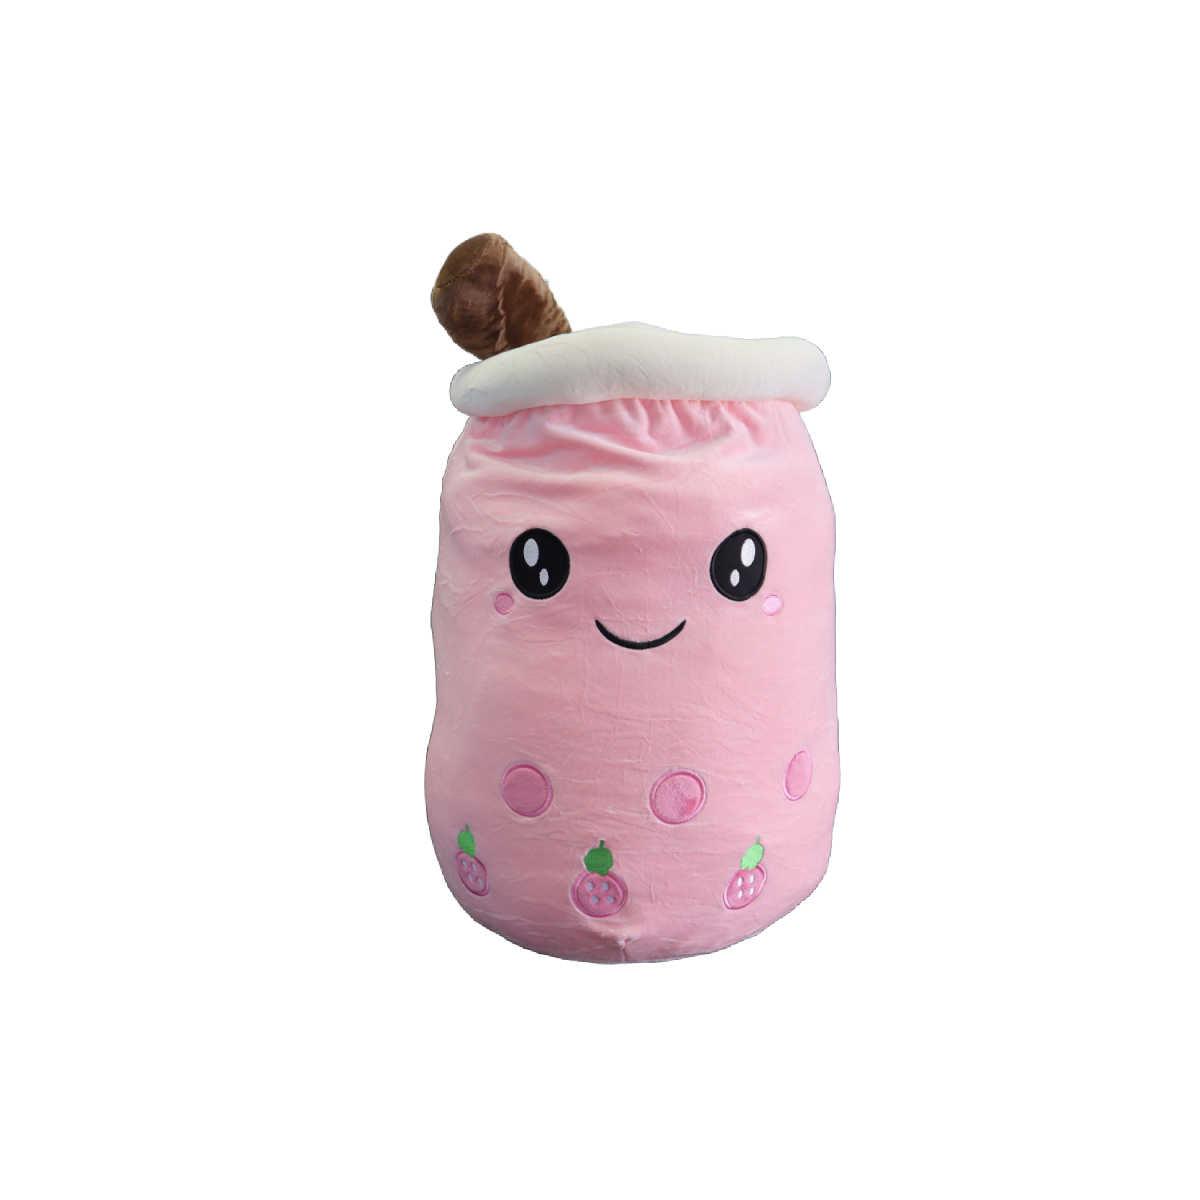 Boba Tea "XL" Size Strawberry Plushie Toy (Open Eyes) - 26 Inches Tall/ 14 Inches Wide-Plushie-Zobie Productions-Zobie Productions